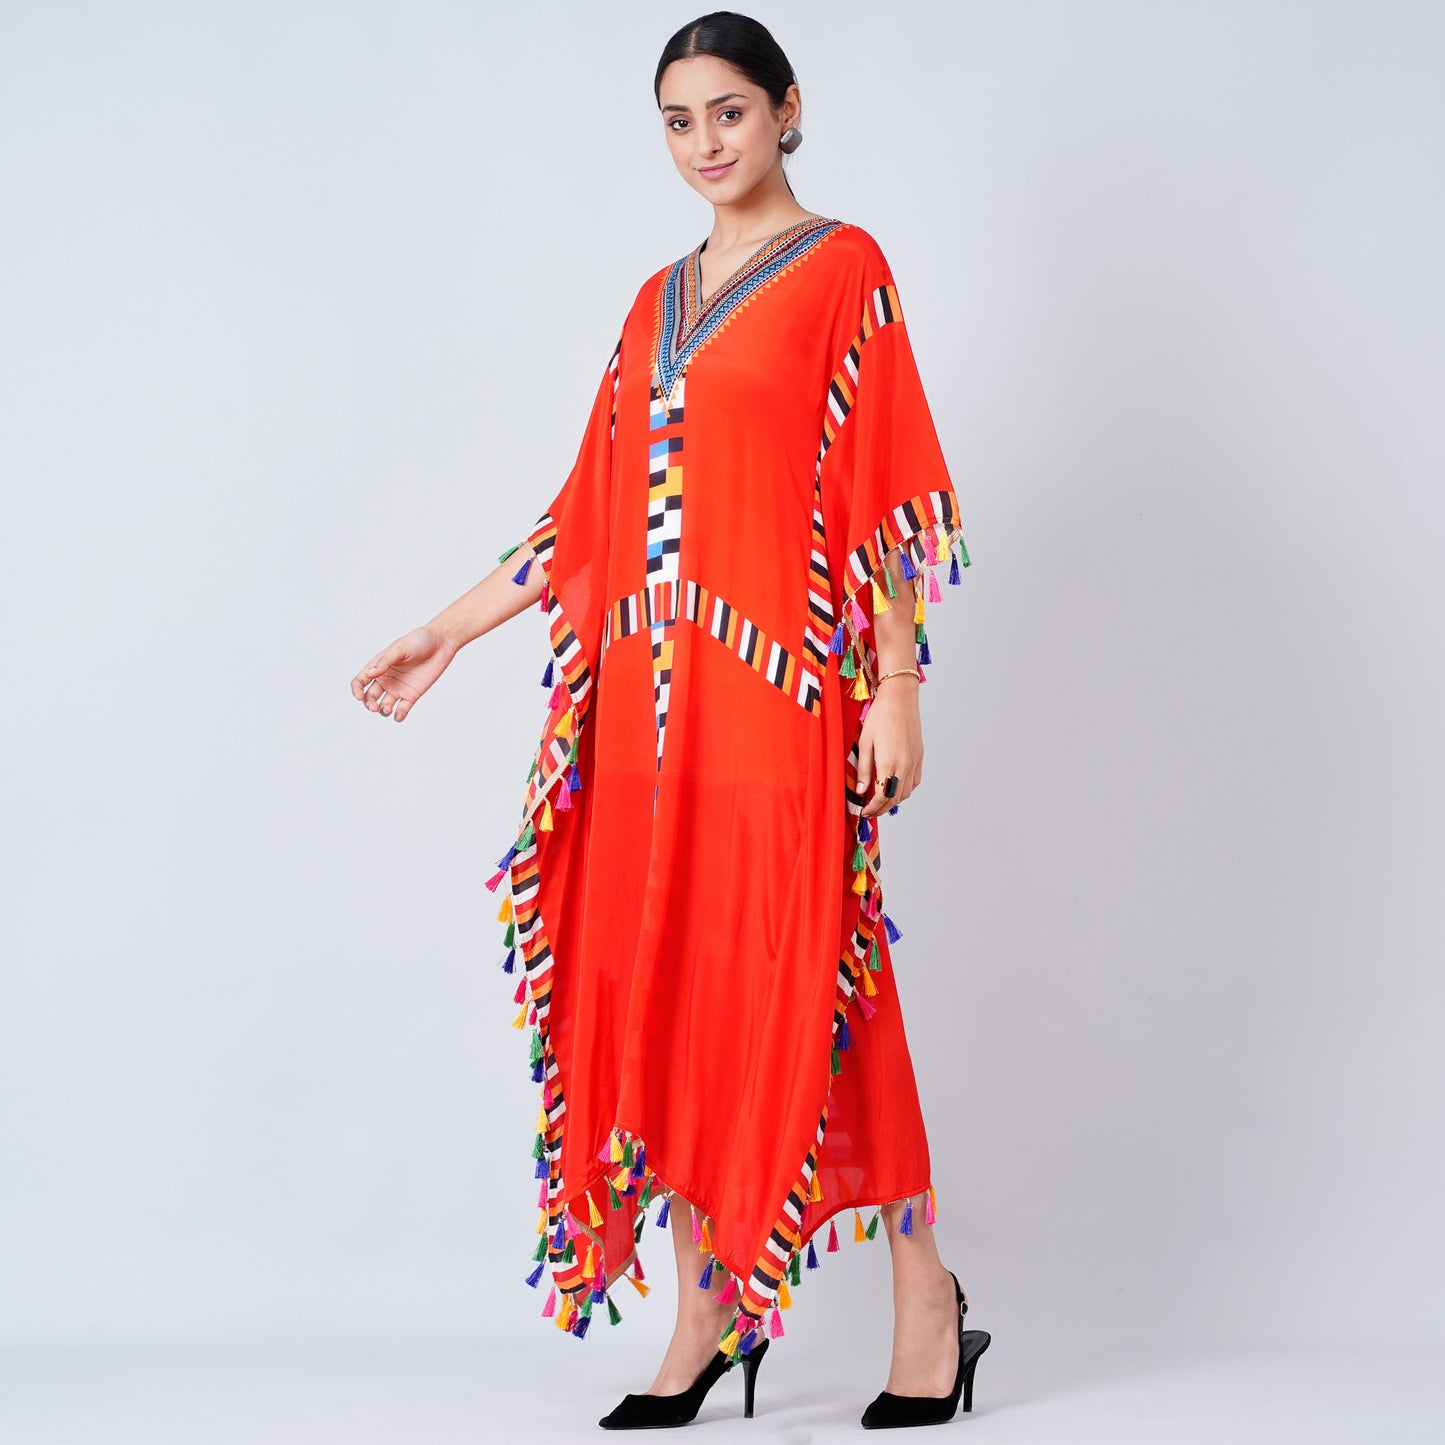 Red Geometric Mid Length Kaftan with Lace